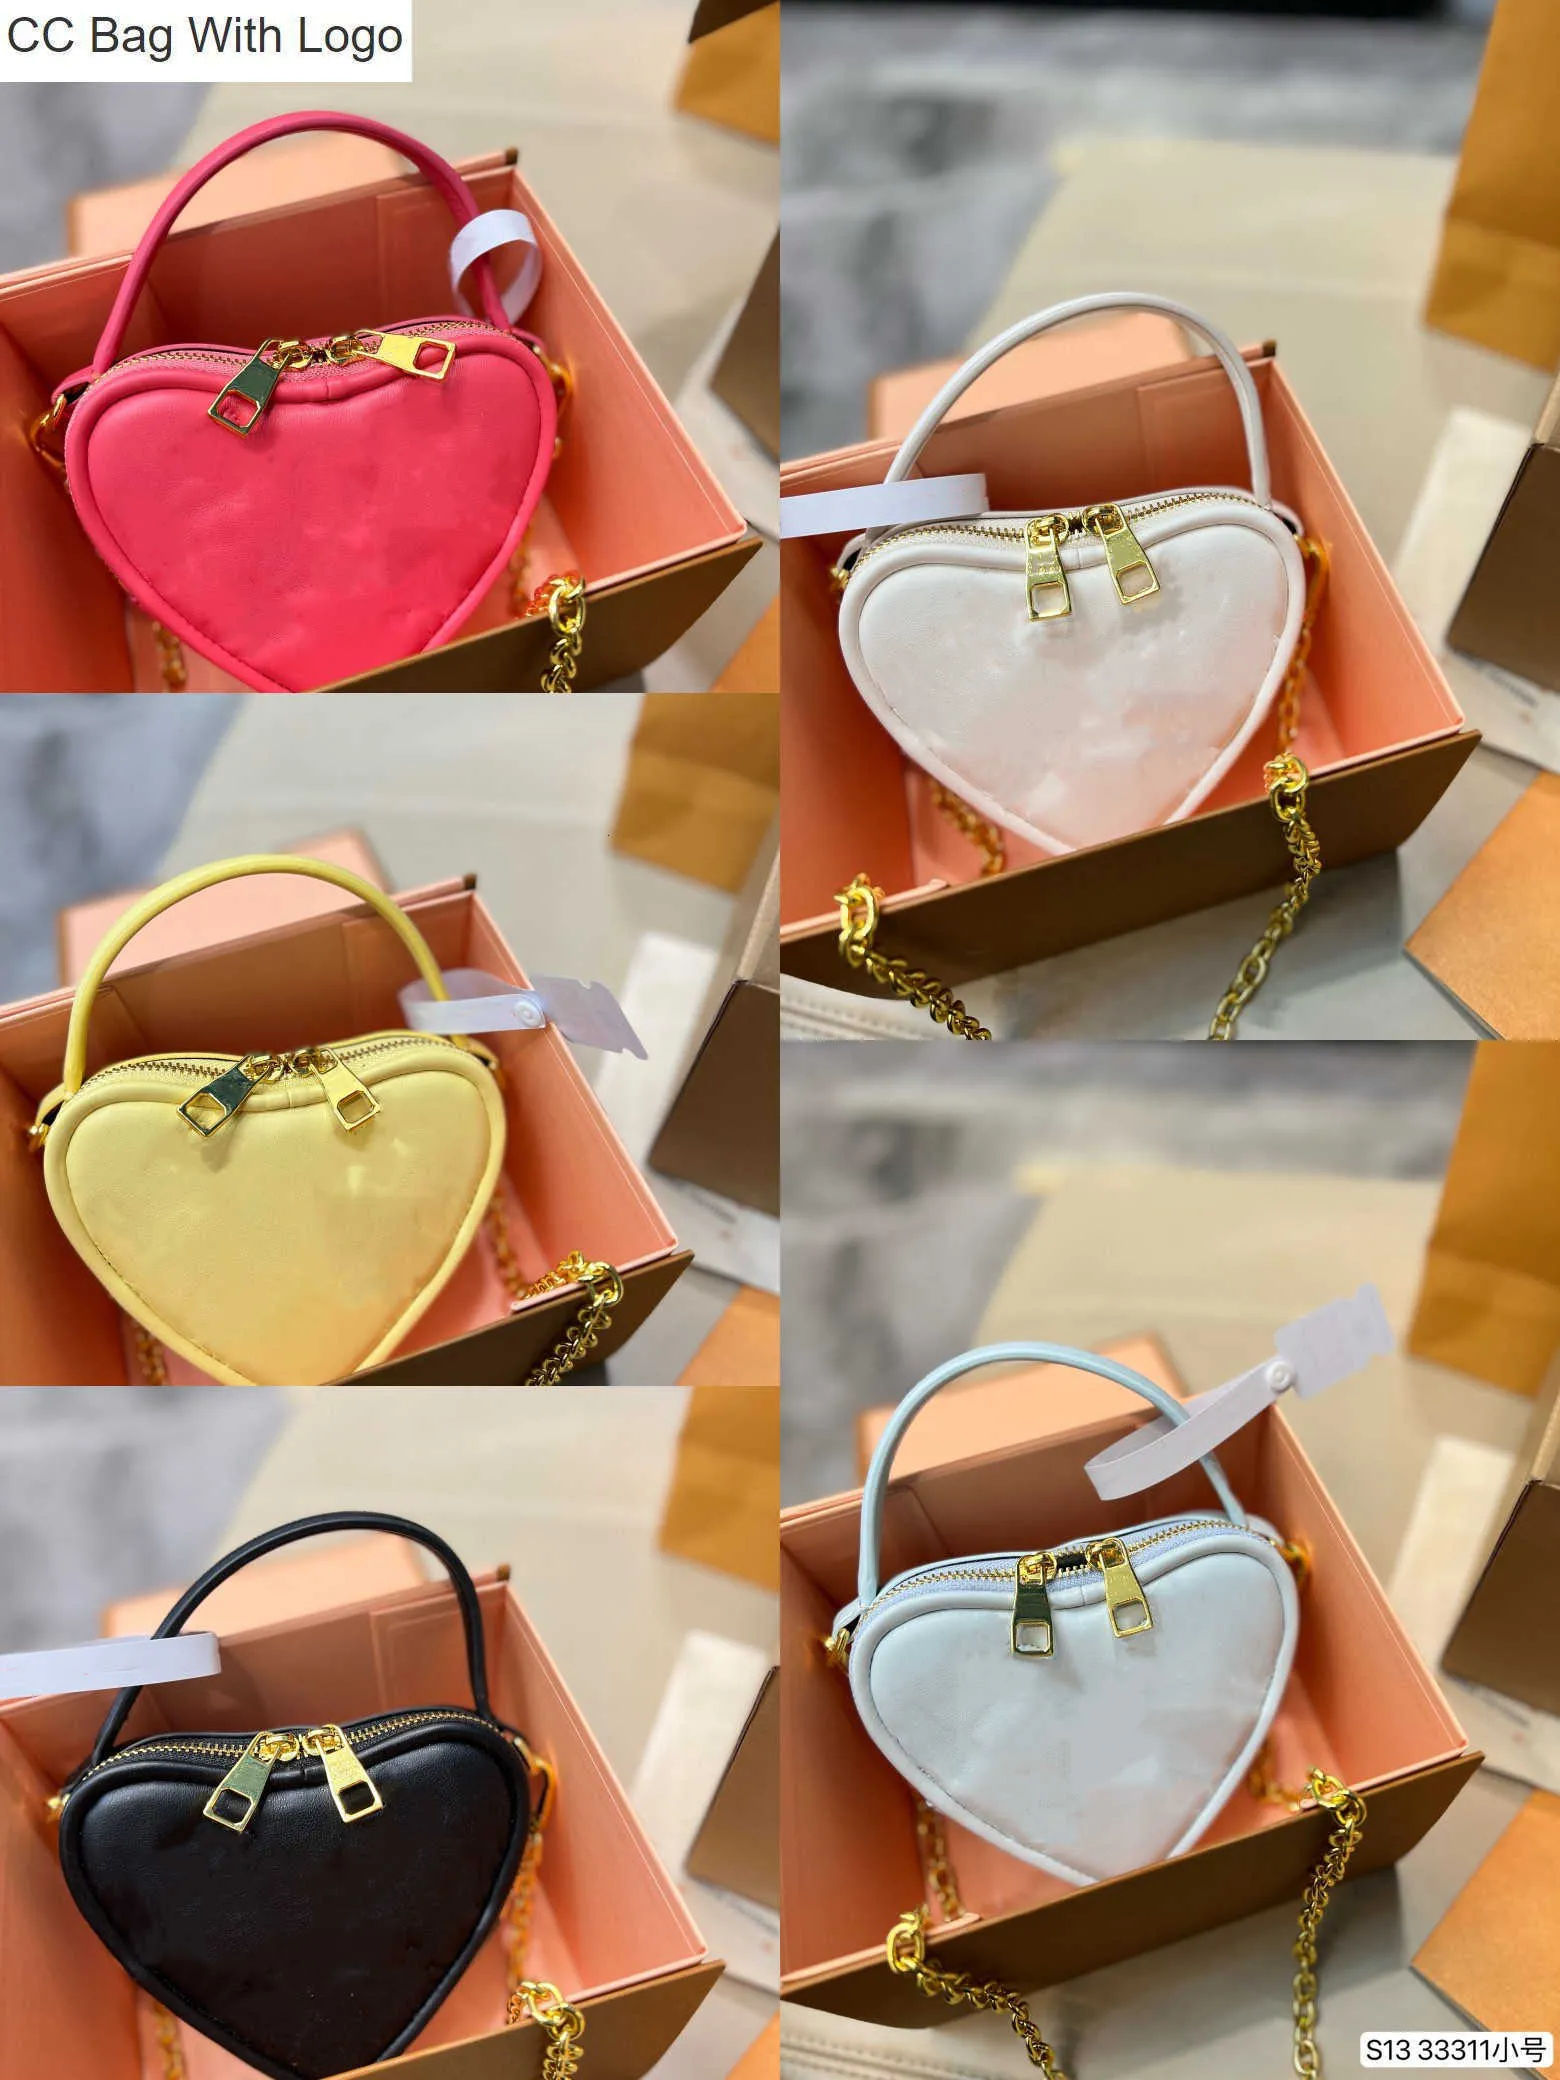 CC Bag Other Bags Qualified valentine's day love handbags bag The latest ms classic bags can be portable shoulder High-end designer bags QRMH